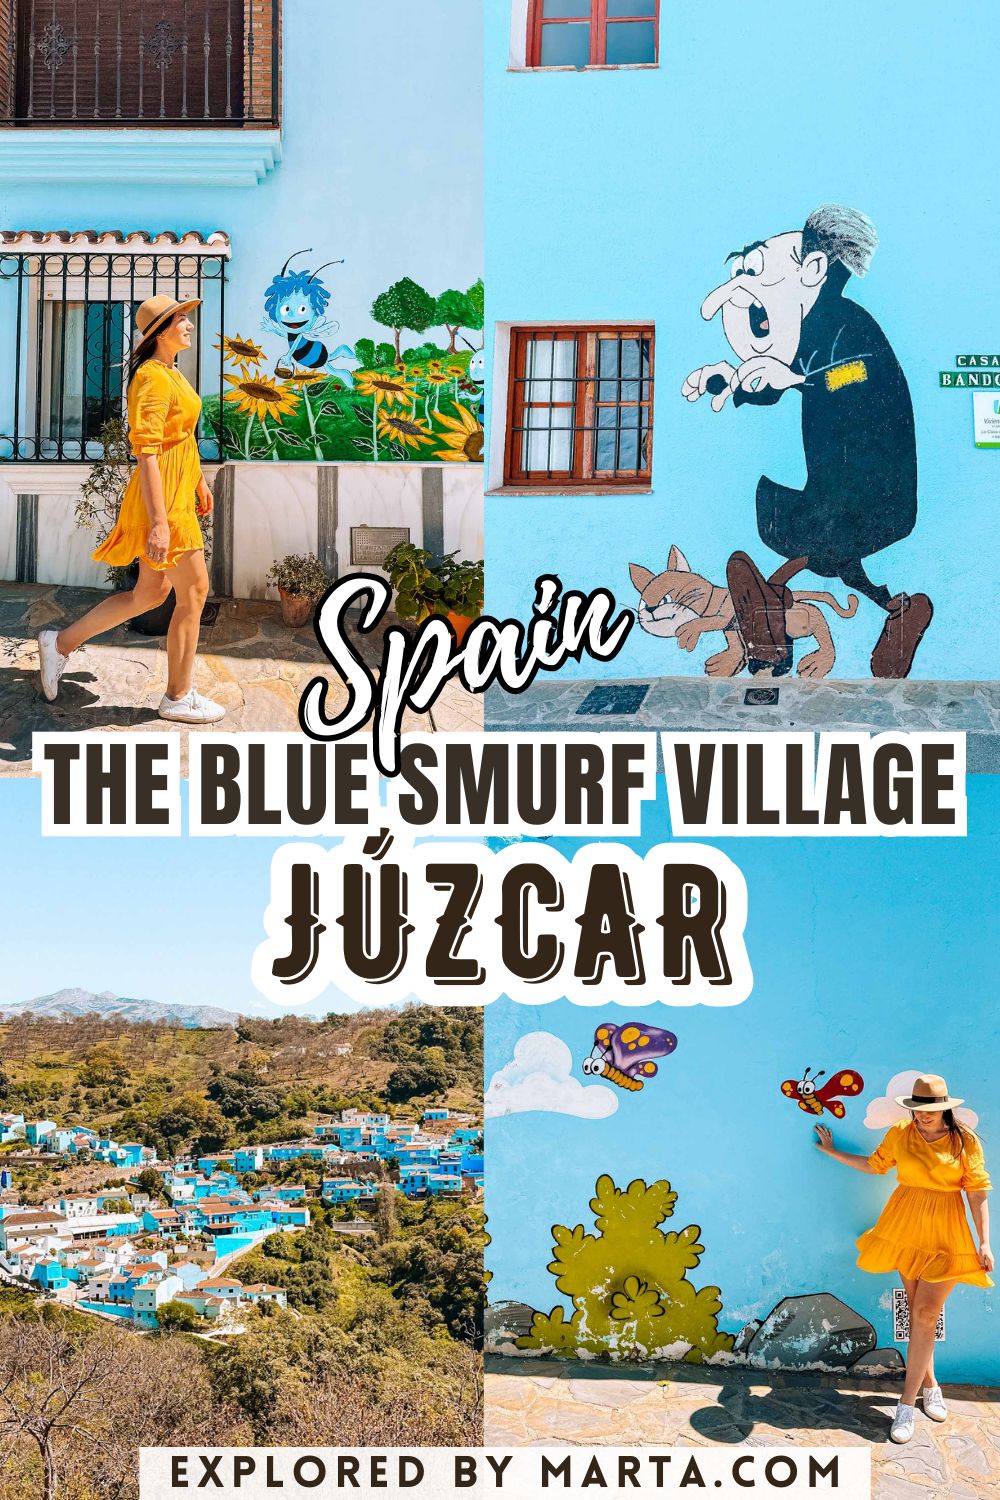 Juzcar, Spain - the blue Smurf village in Malaga province, Andalusia